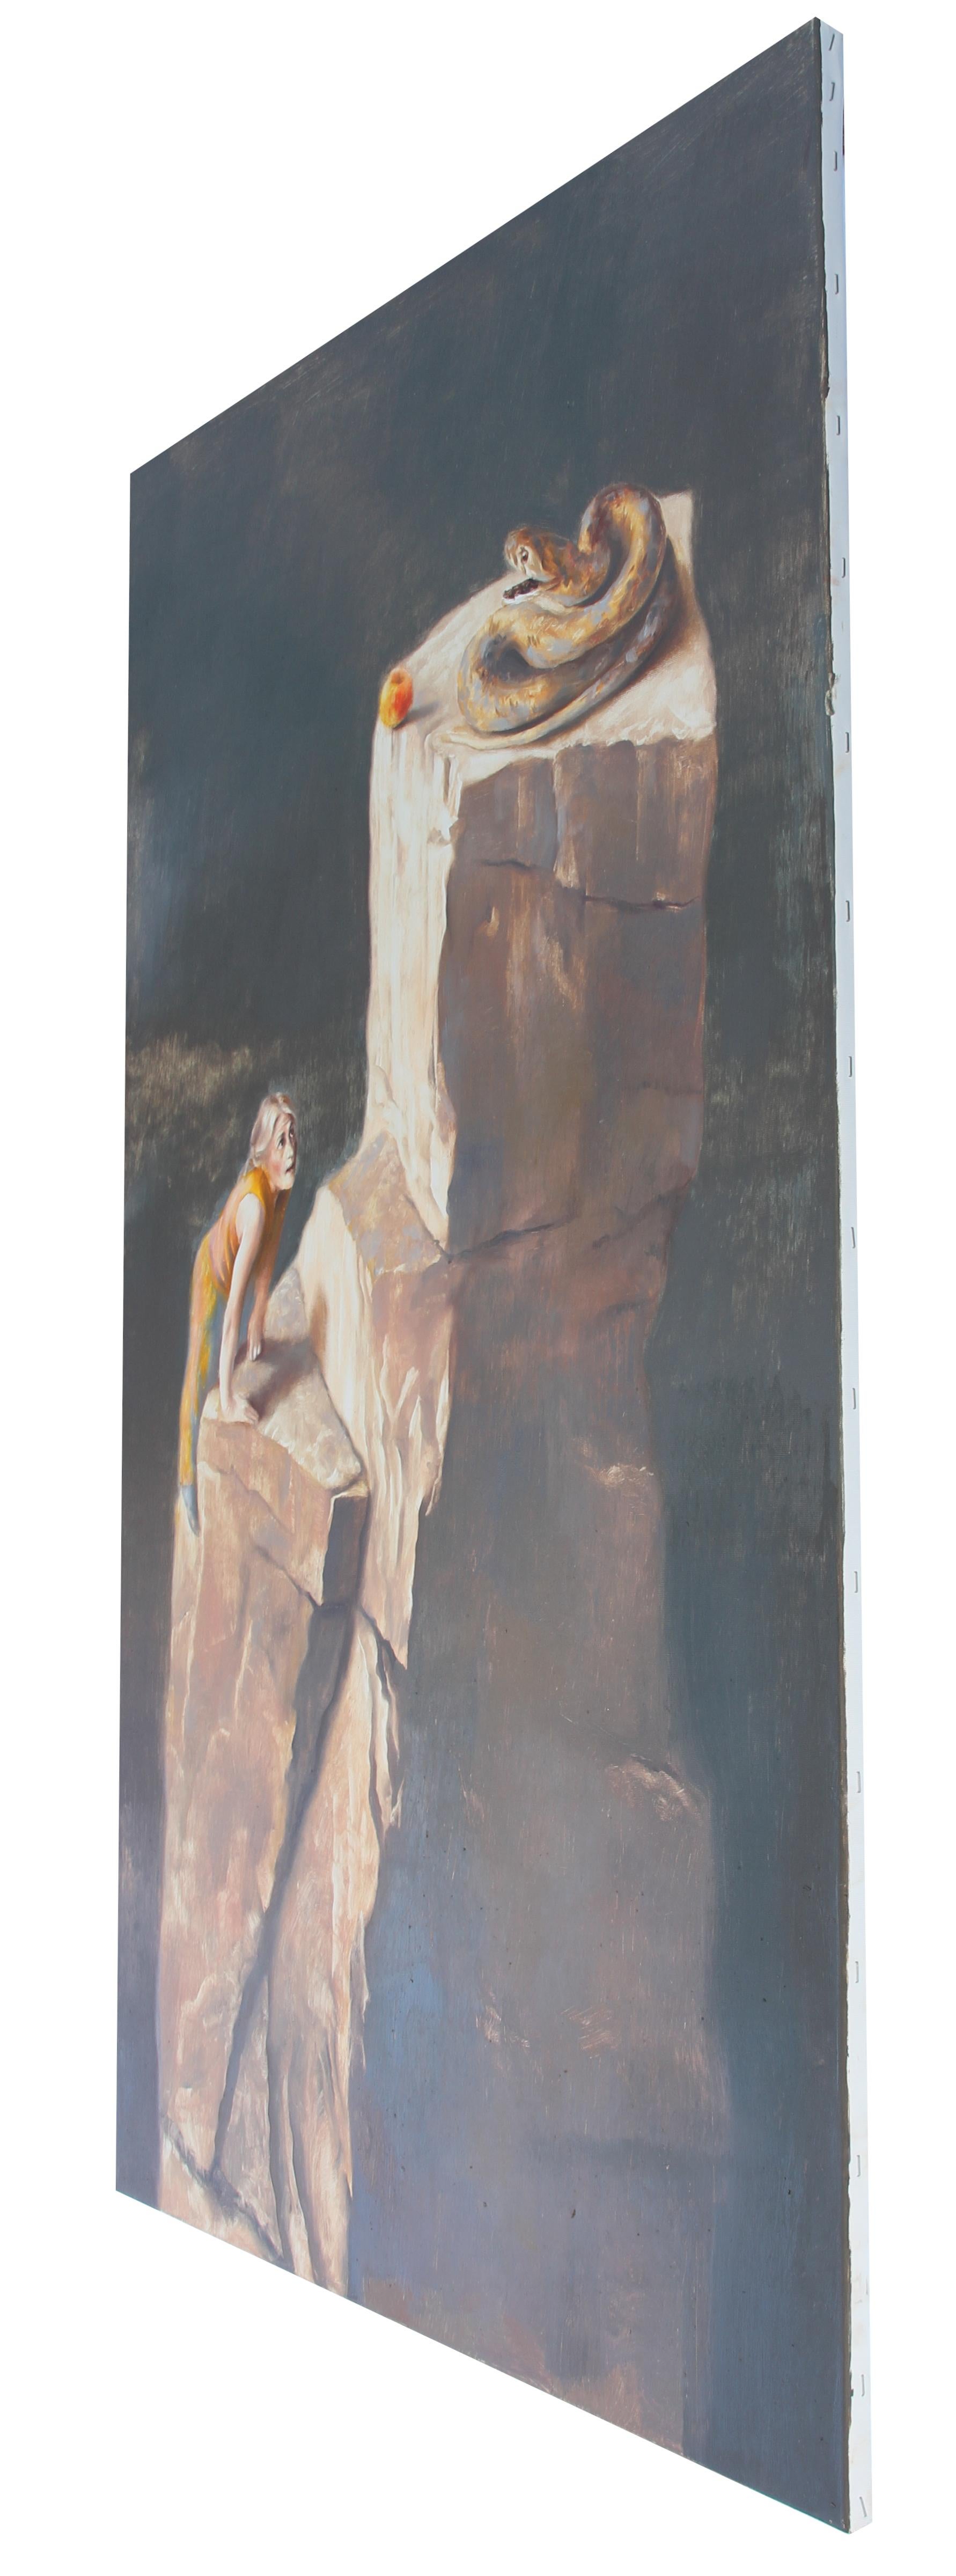 Fate Challenge I (lady climber art forbidden apple snake brown brown earth tones - Painting by Rudolf Kosow